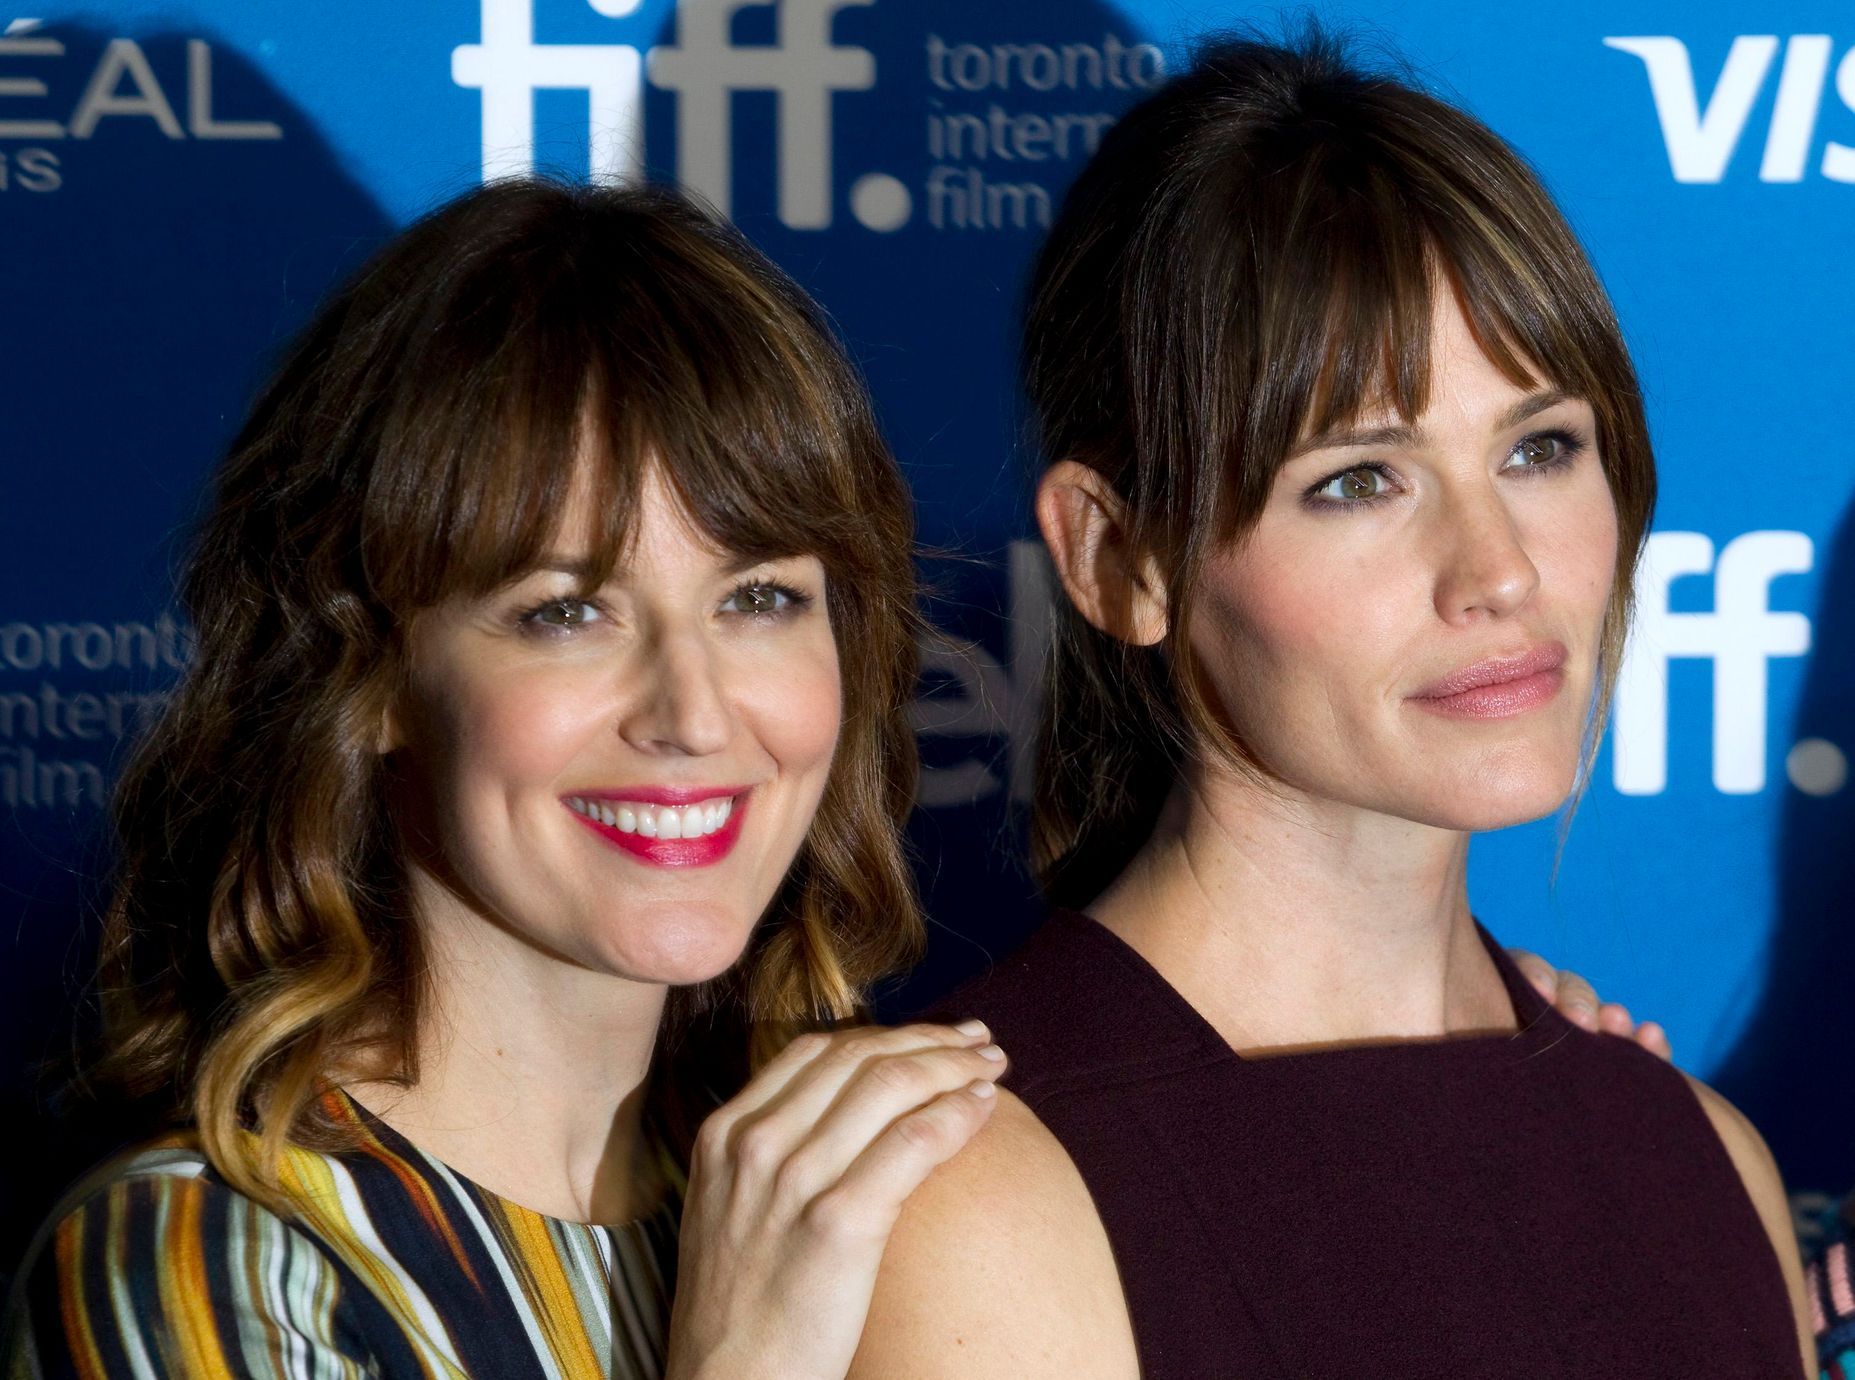 Actresses DeWitt and Garner attend a news conference to promote their film &quot;Men, Women &amp; Children&quot; at the Toronto International Film Festival in Toronto